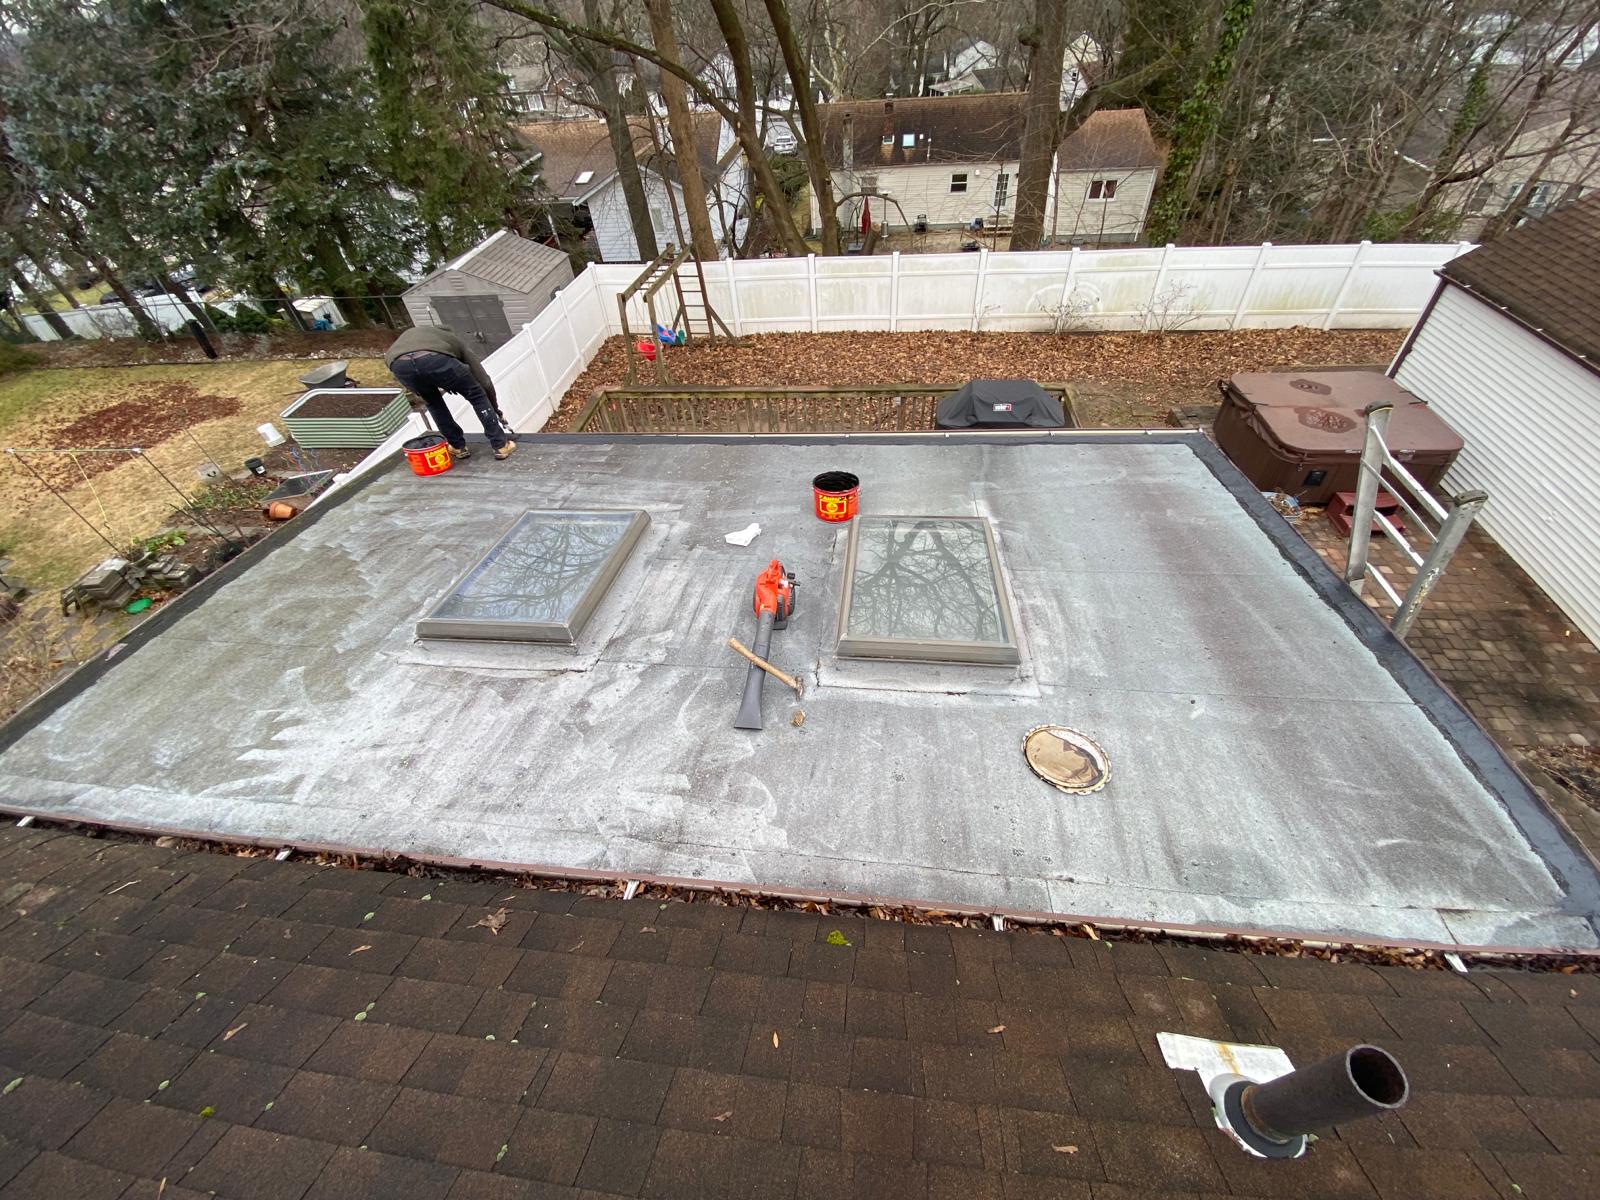 New Flat Roof Installation with Silicone Roof in Paramus NJ Project Shot 3